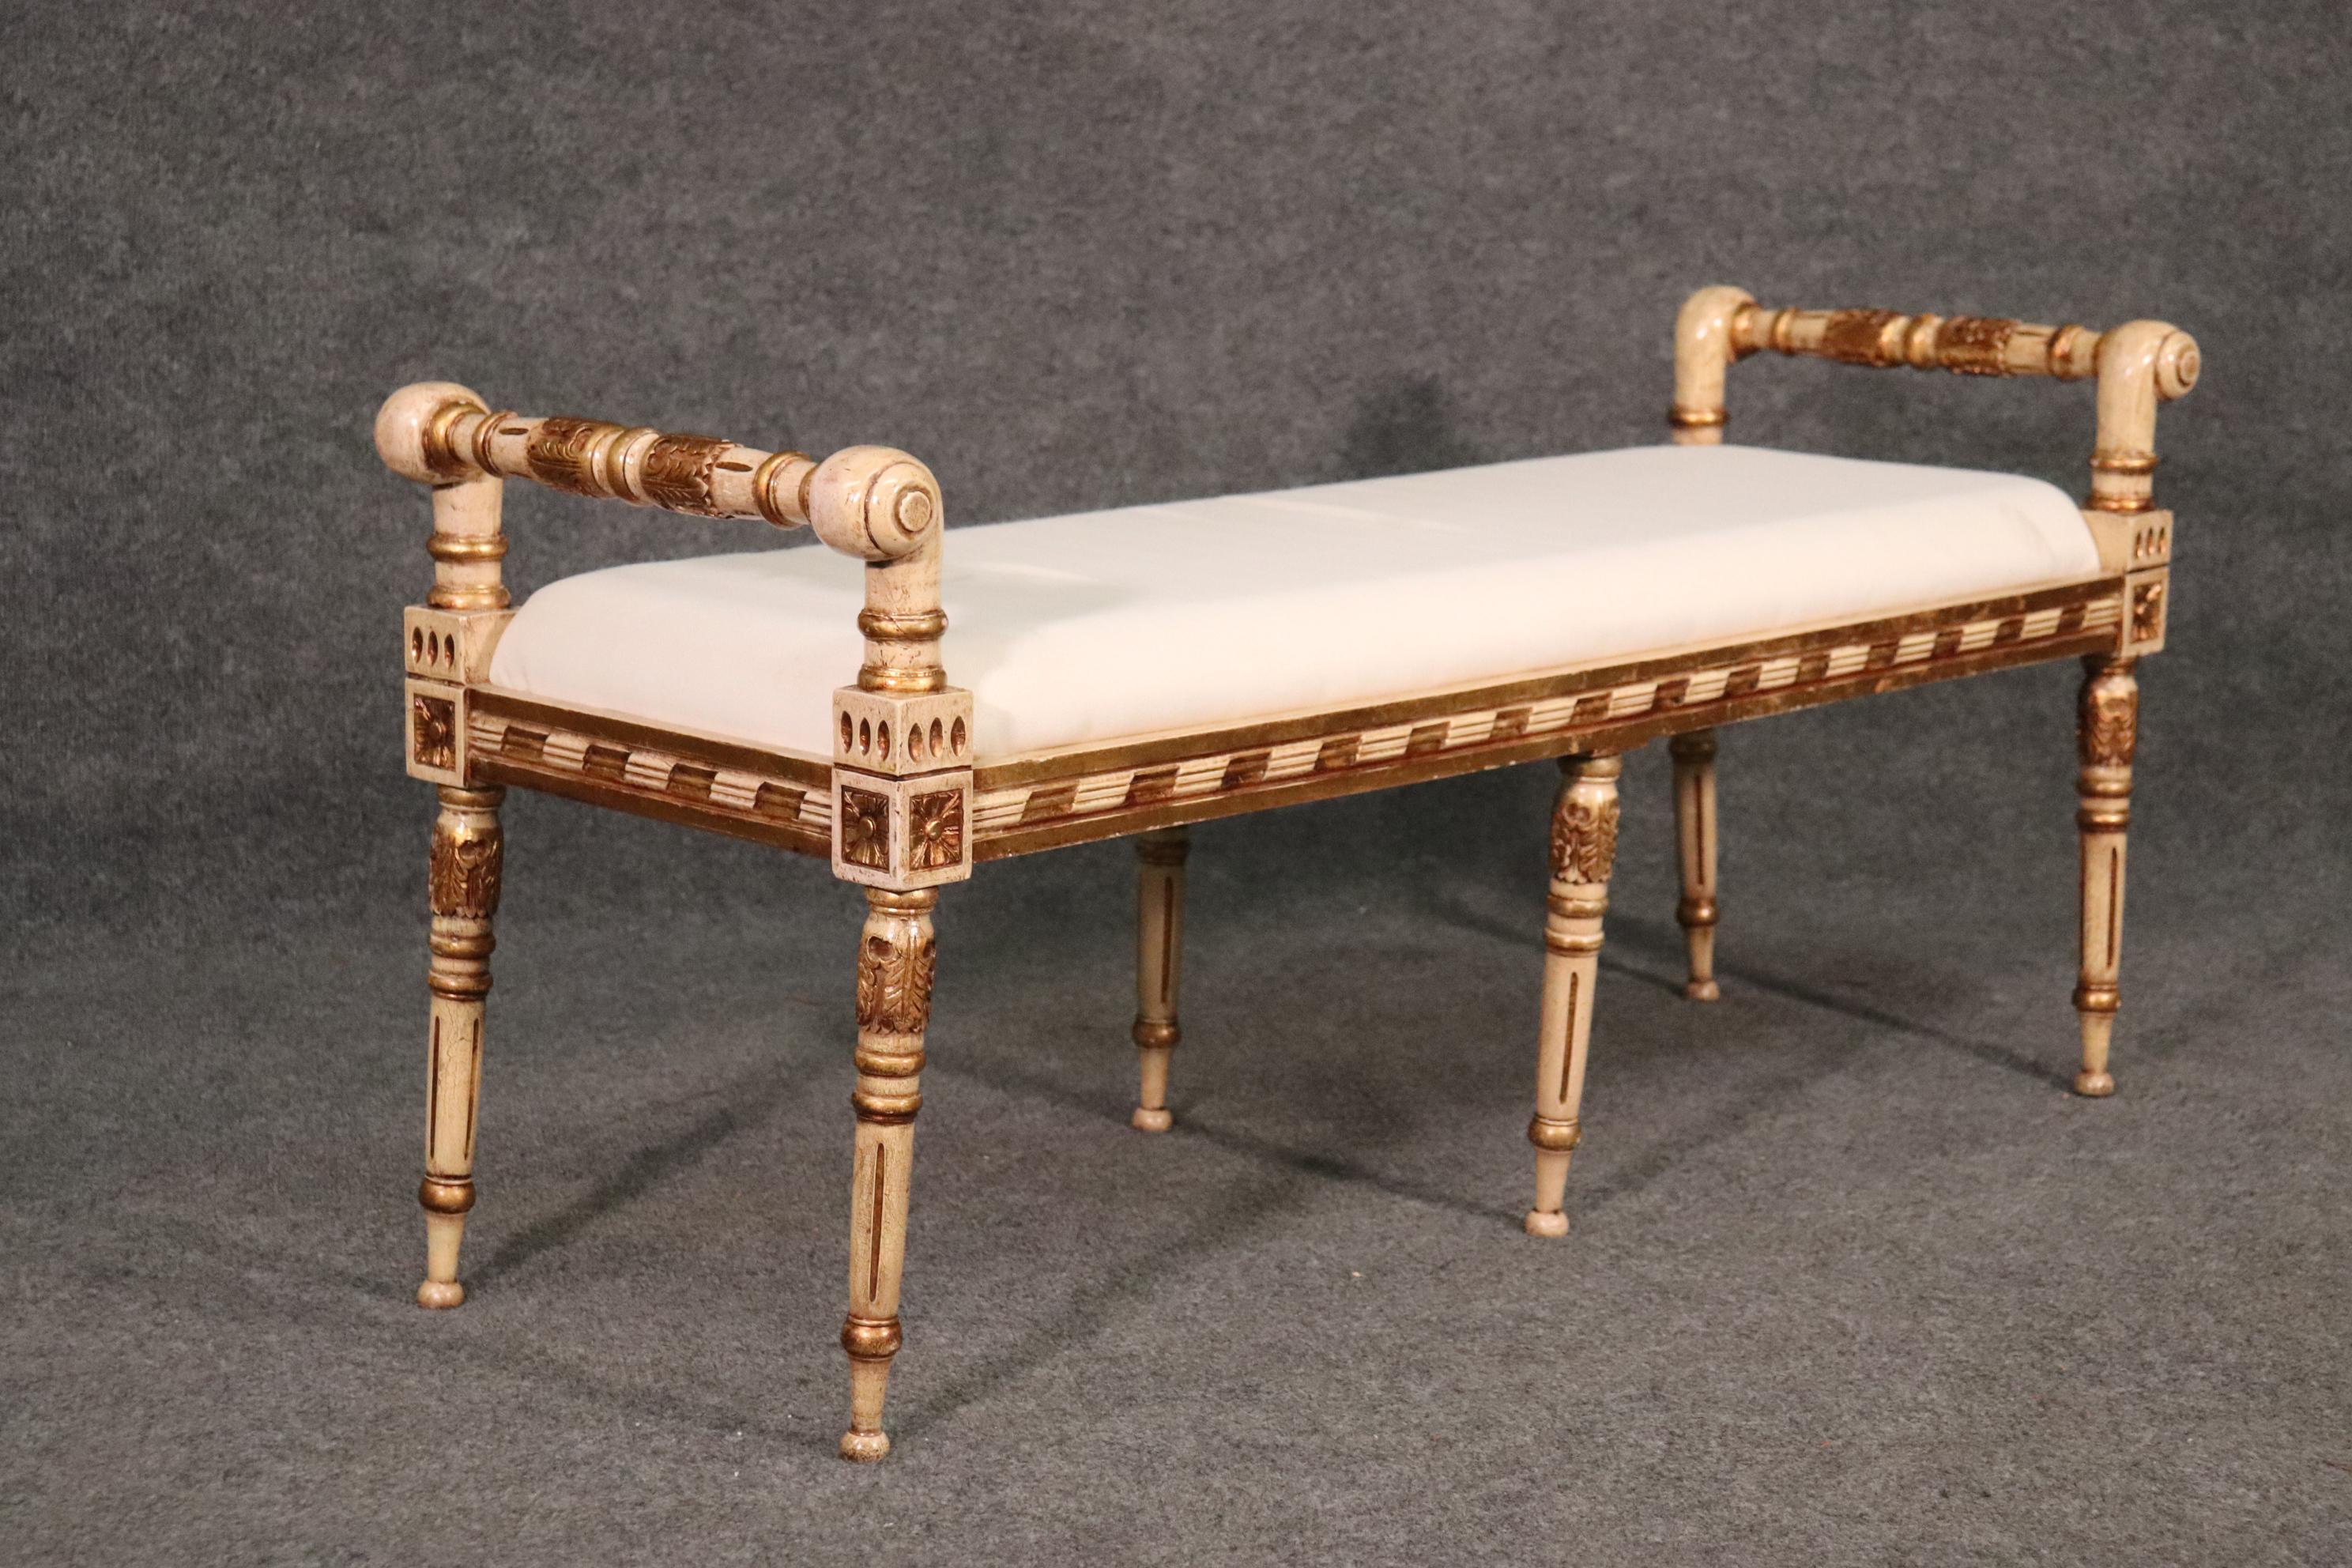 This is a pretty bench. The bench needs the legs tightened up straight but we will do it for you. The bench measures 48 wide x 16 deep x 21 tall and the seat height is 17 inches.